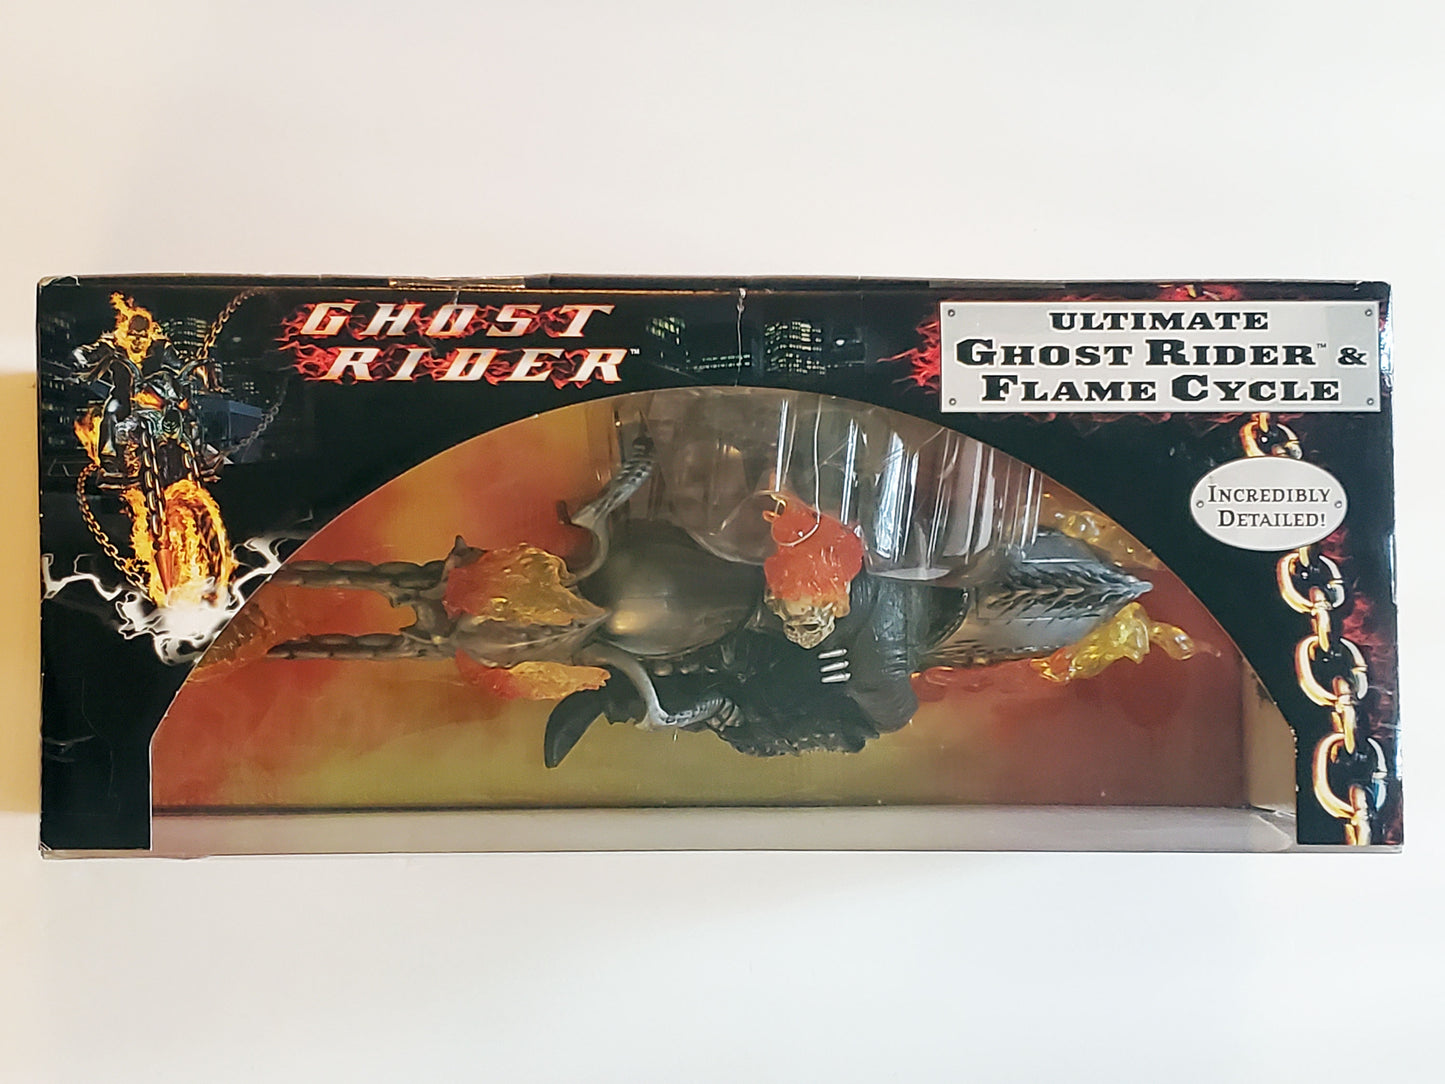 Ultimate 12" Ghost Rider & Flame Cycle